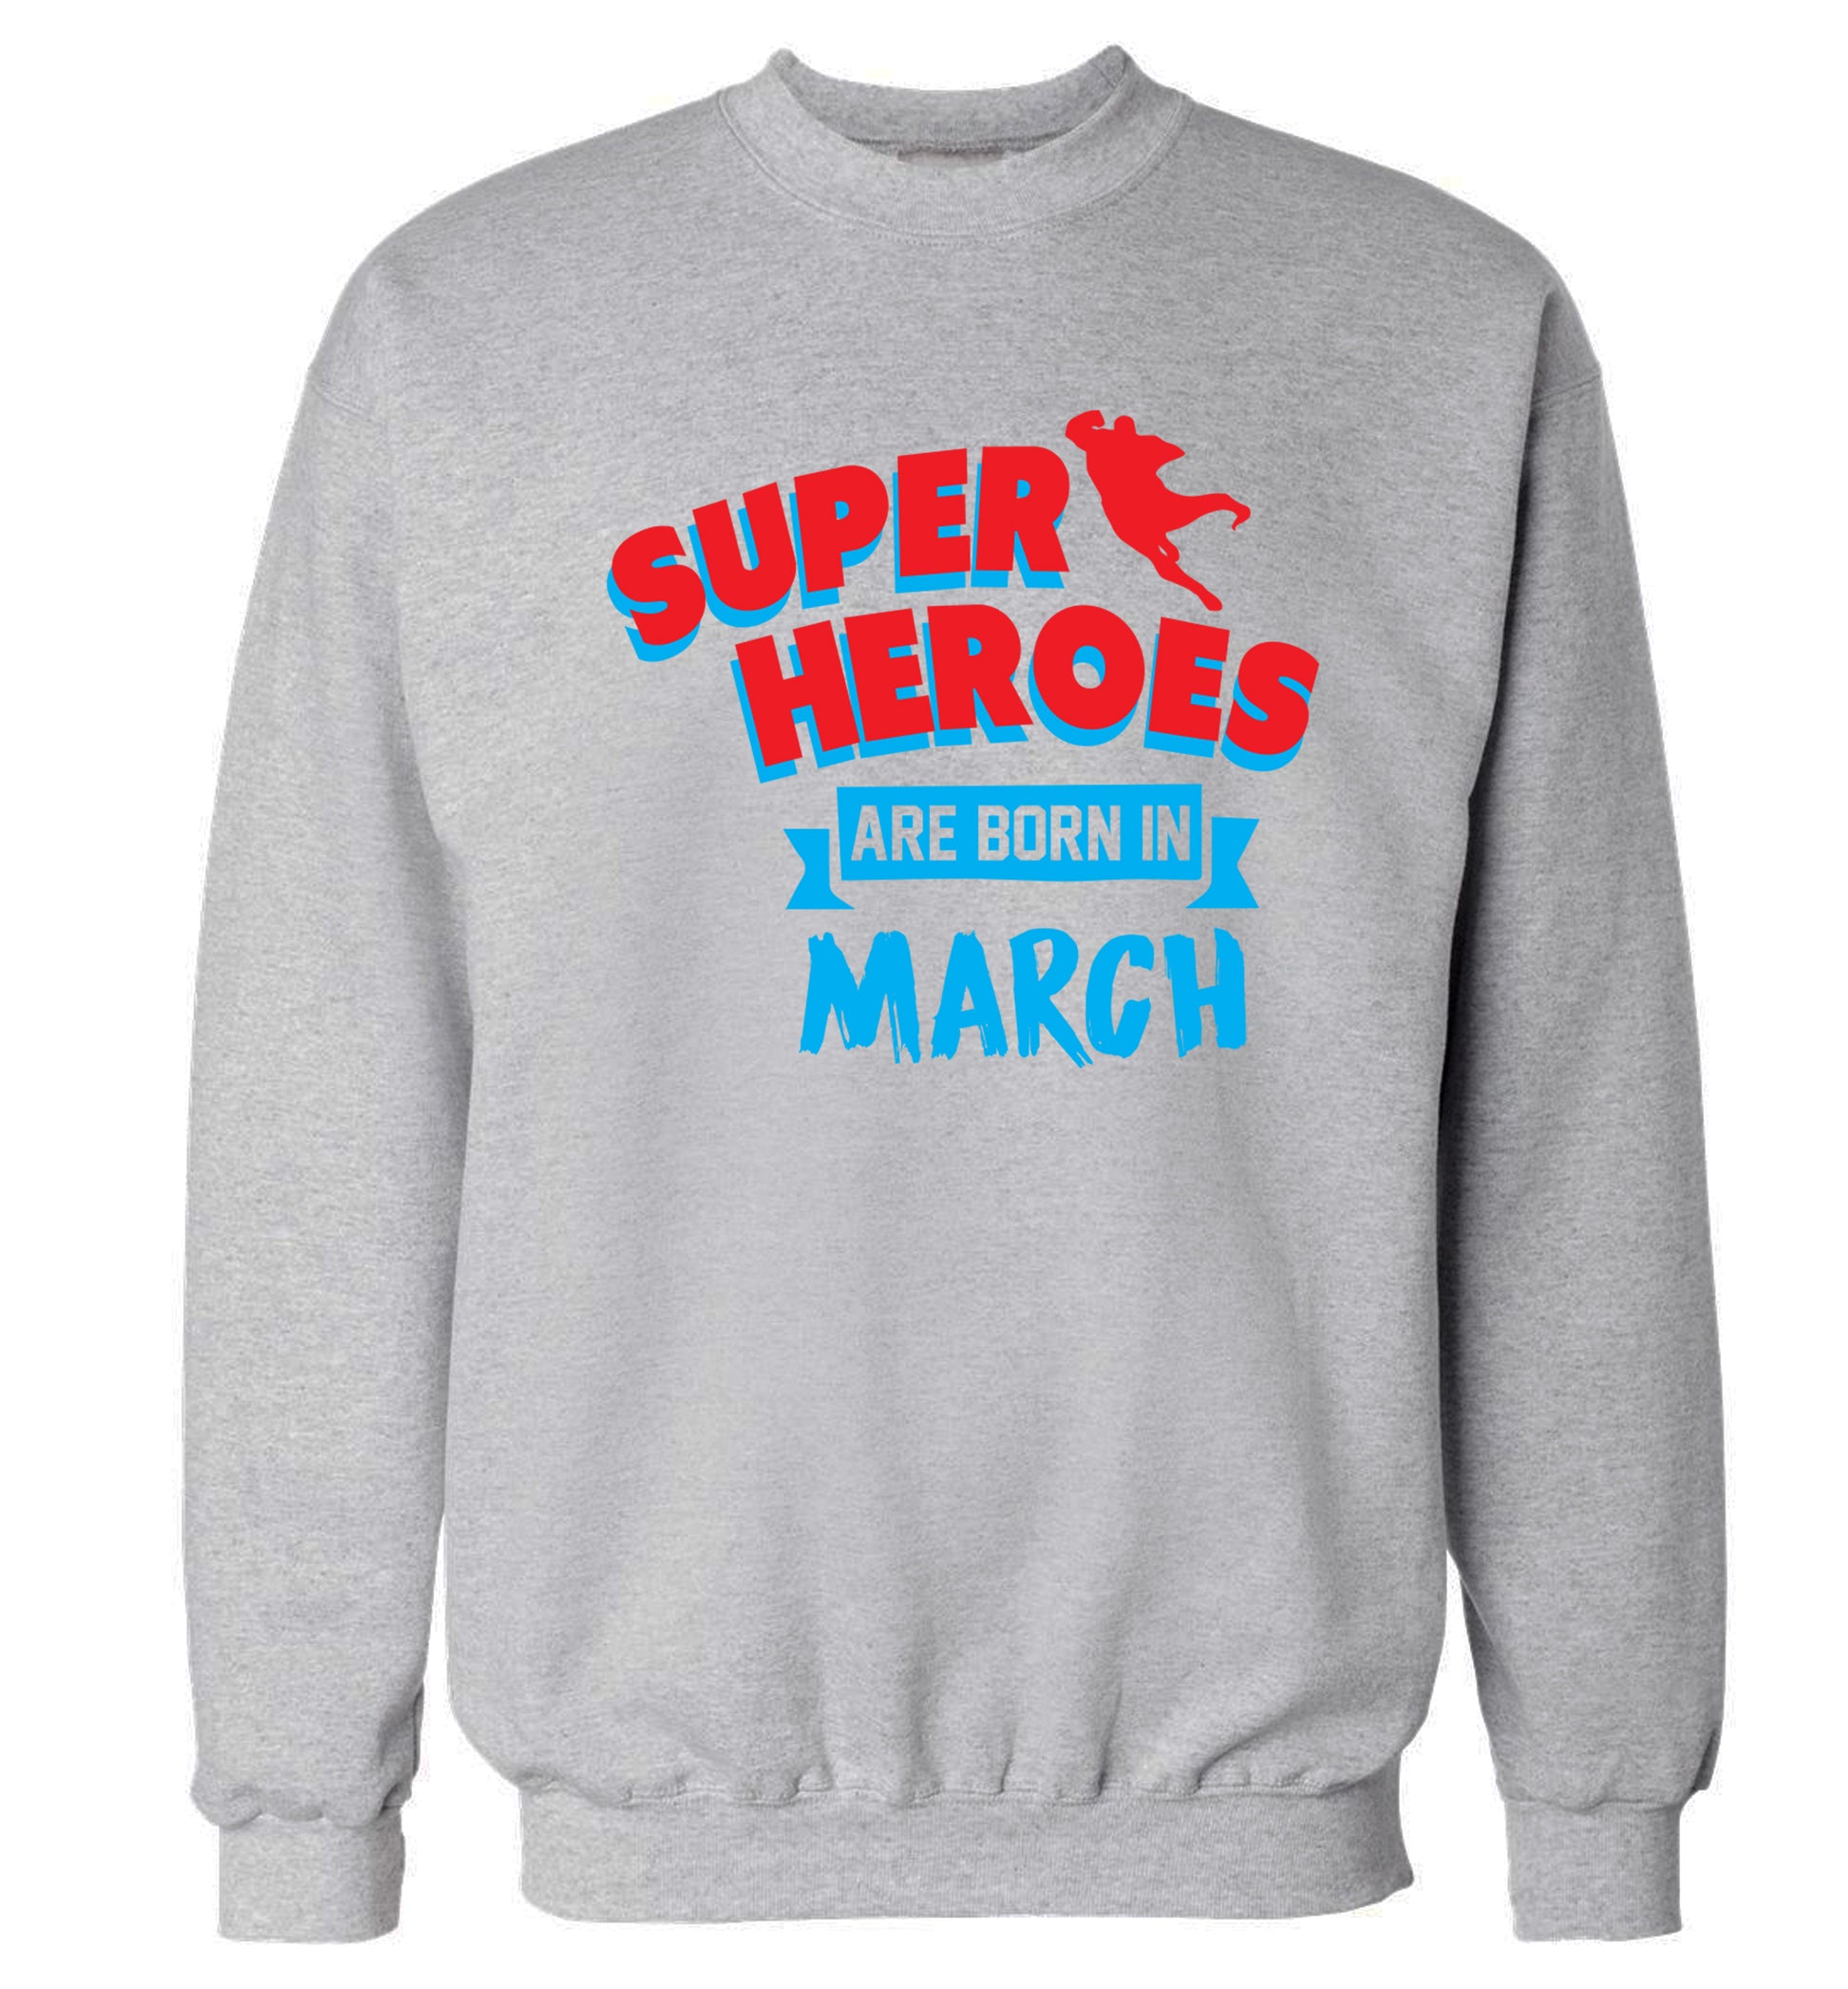 Superheros are born in March Adult's unisex grey Sweater 2XL